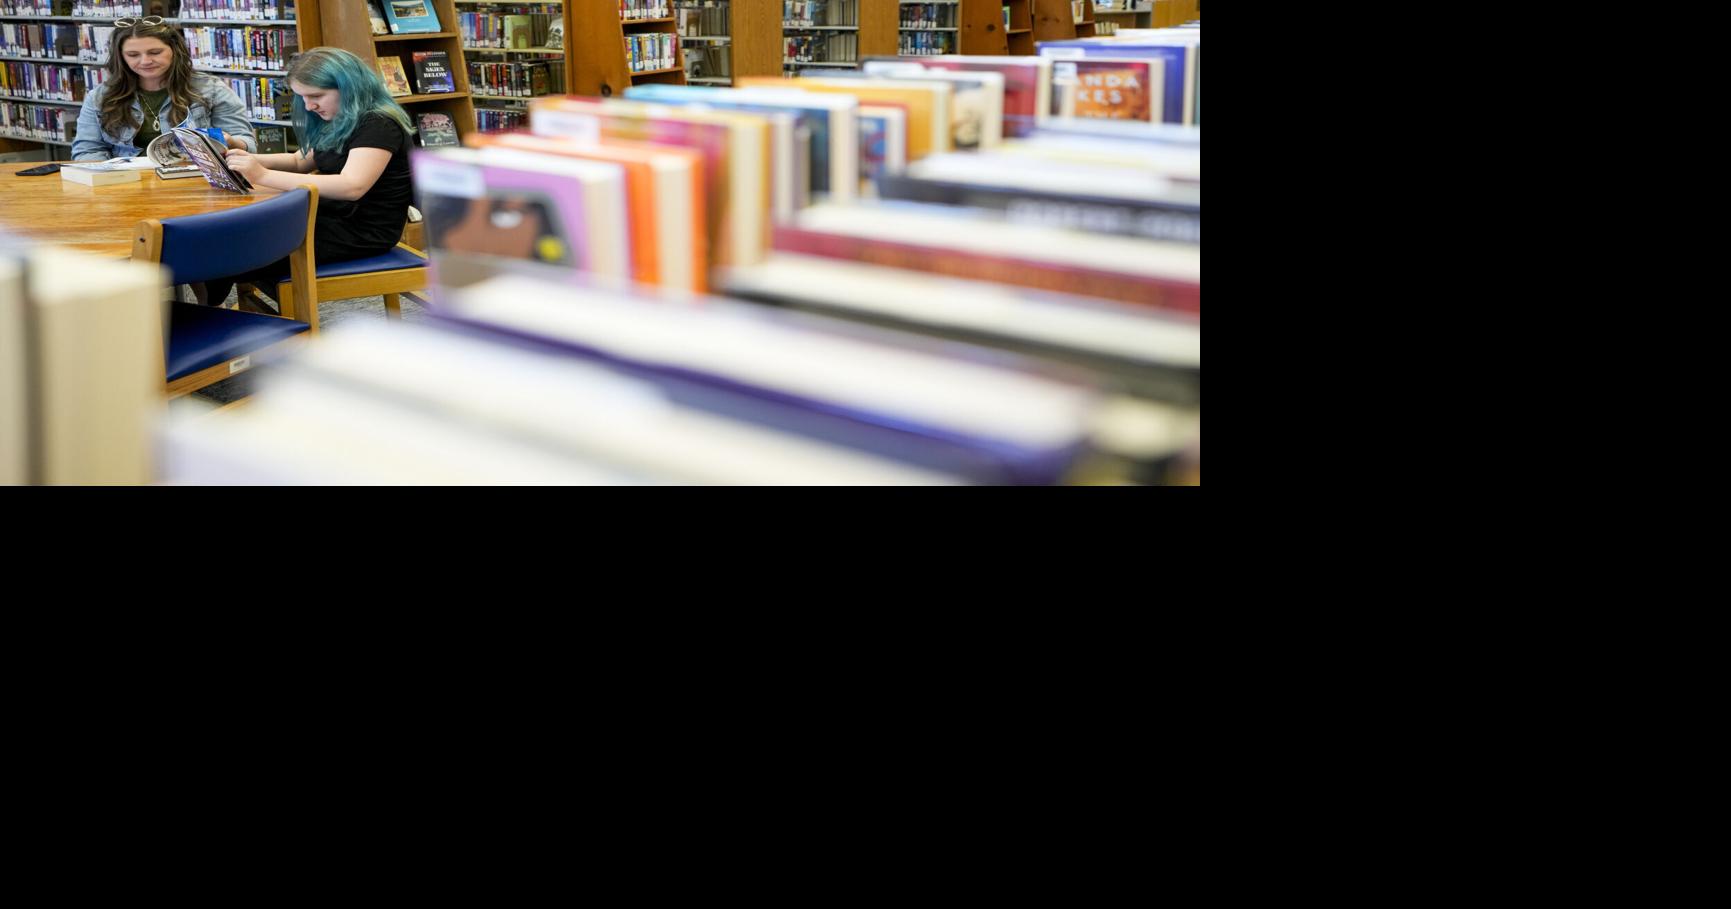 State Mandates for Digital Book Licenses to Libraries are